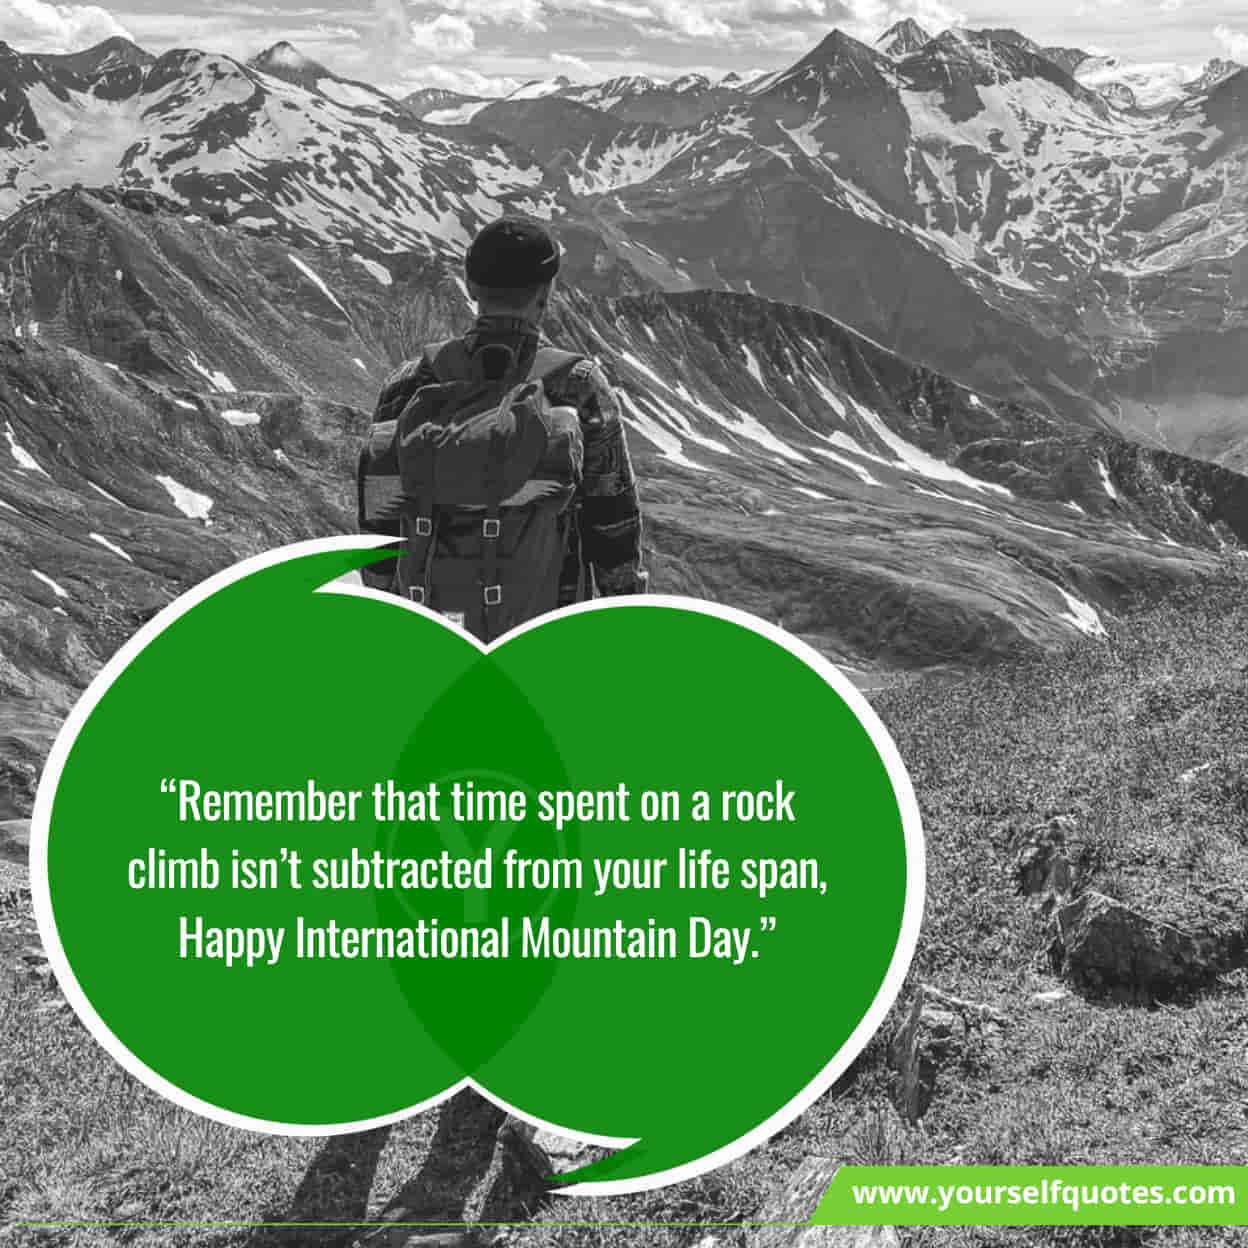 Inspirational Wishes For International Mountain Day 